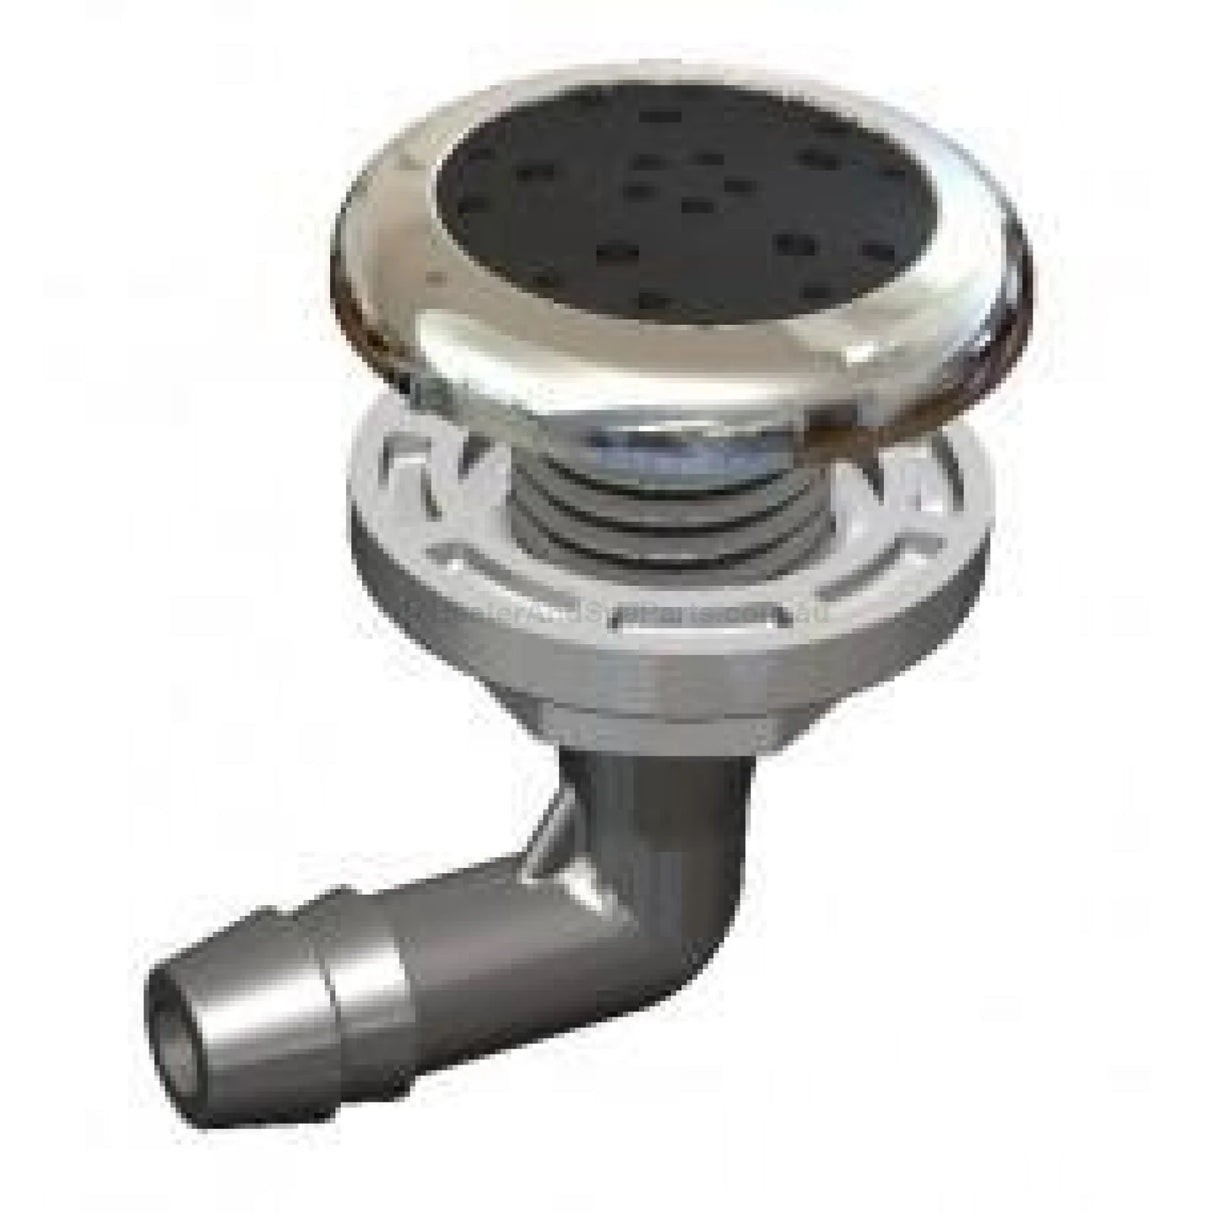 Edgetec O2 Air Injector - Graphite Grey w Stainless Steel Escutcheon - 33.5mm - Heater and Spa Parts